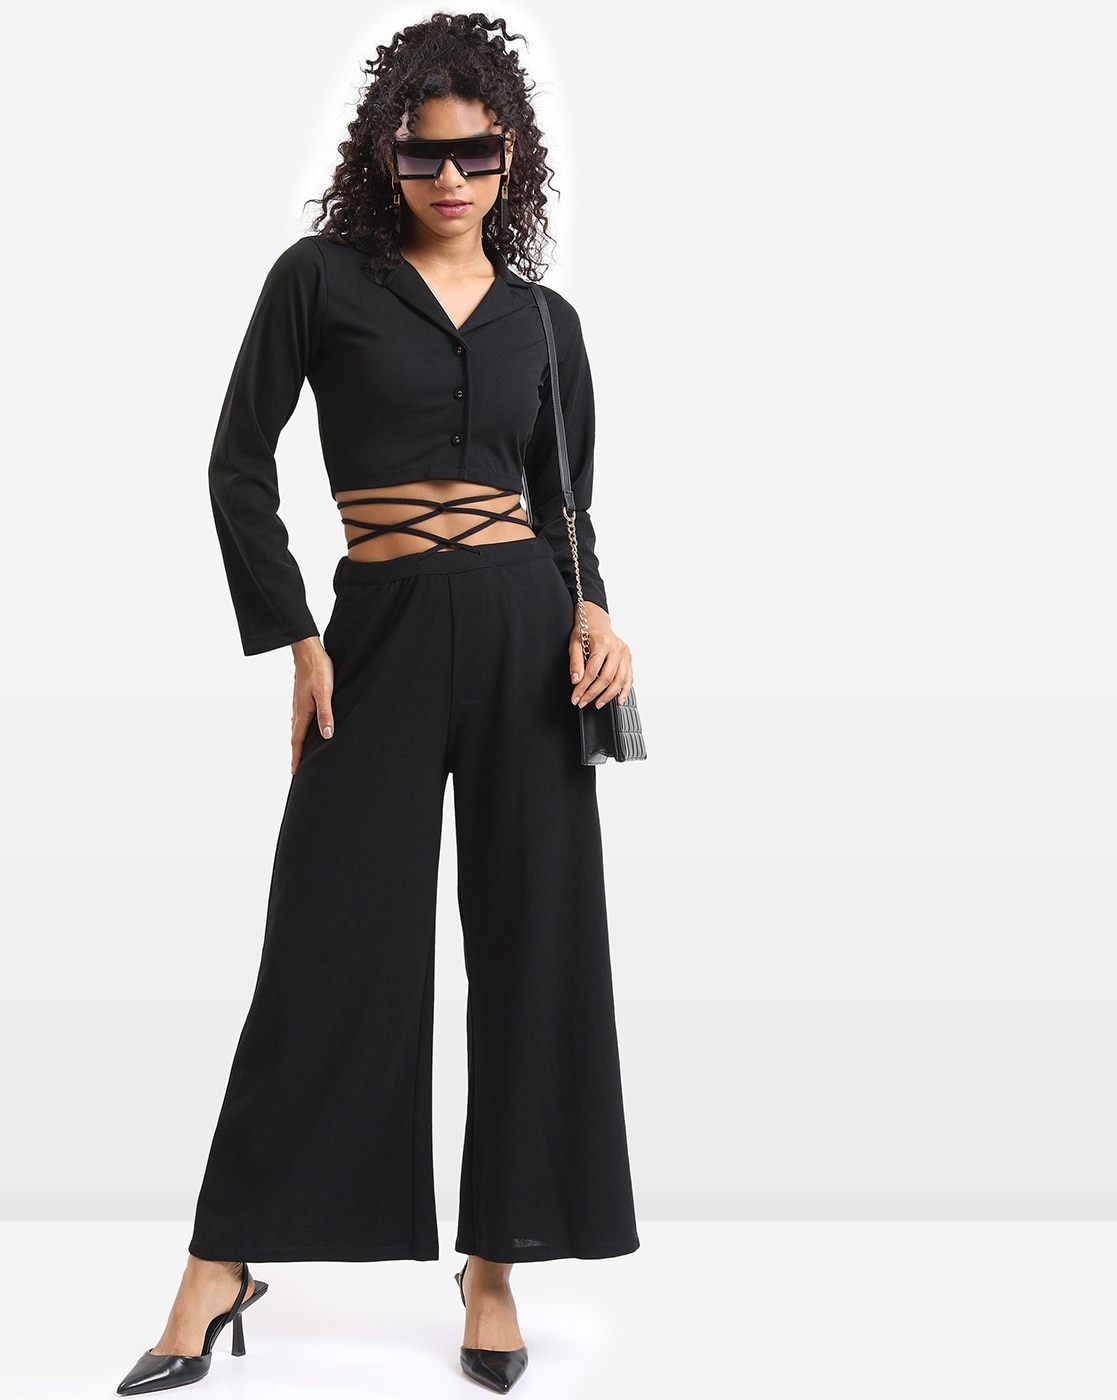 Tie Up Waist Crop Top and Flare Bottom Pants Coords